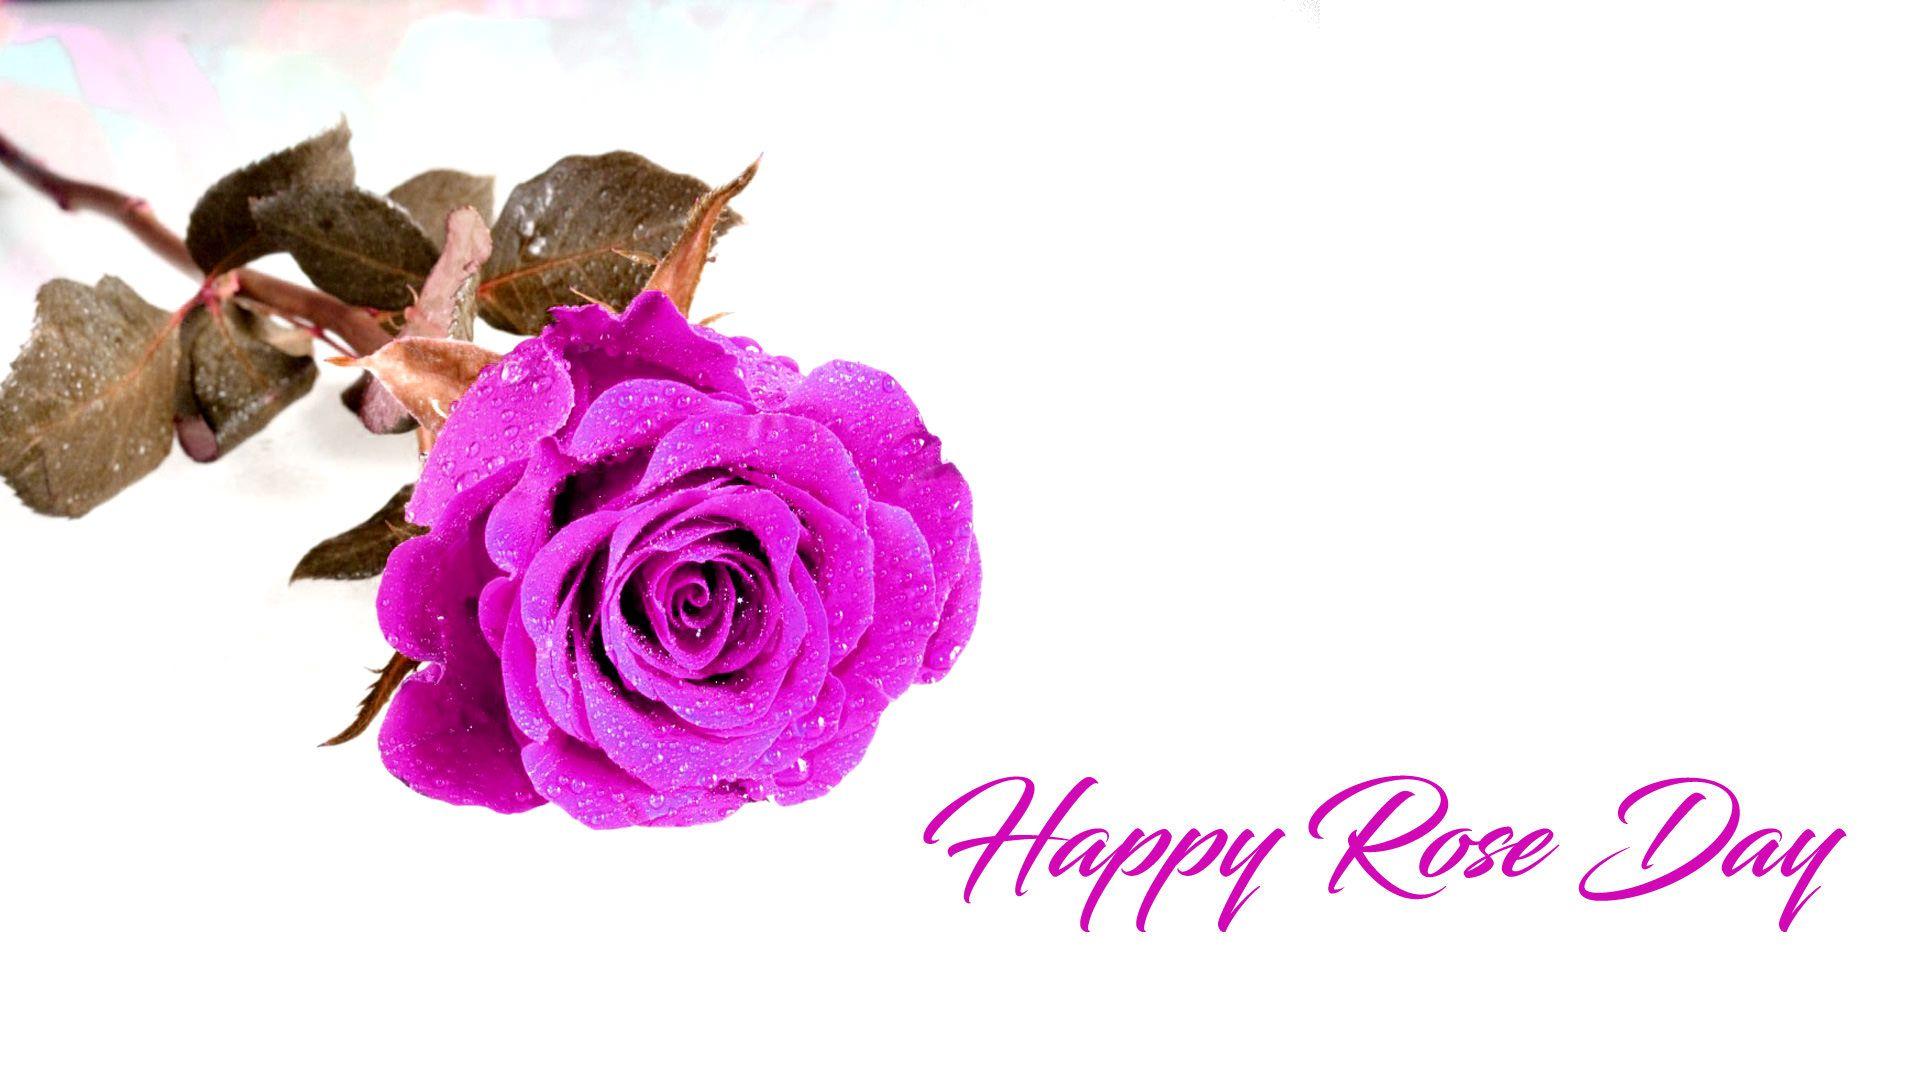 7th Feb Rose Day Wallpaper HD. All Color of Roses for Lover & Friends